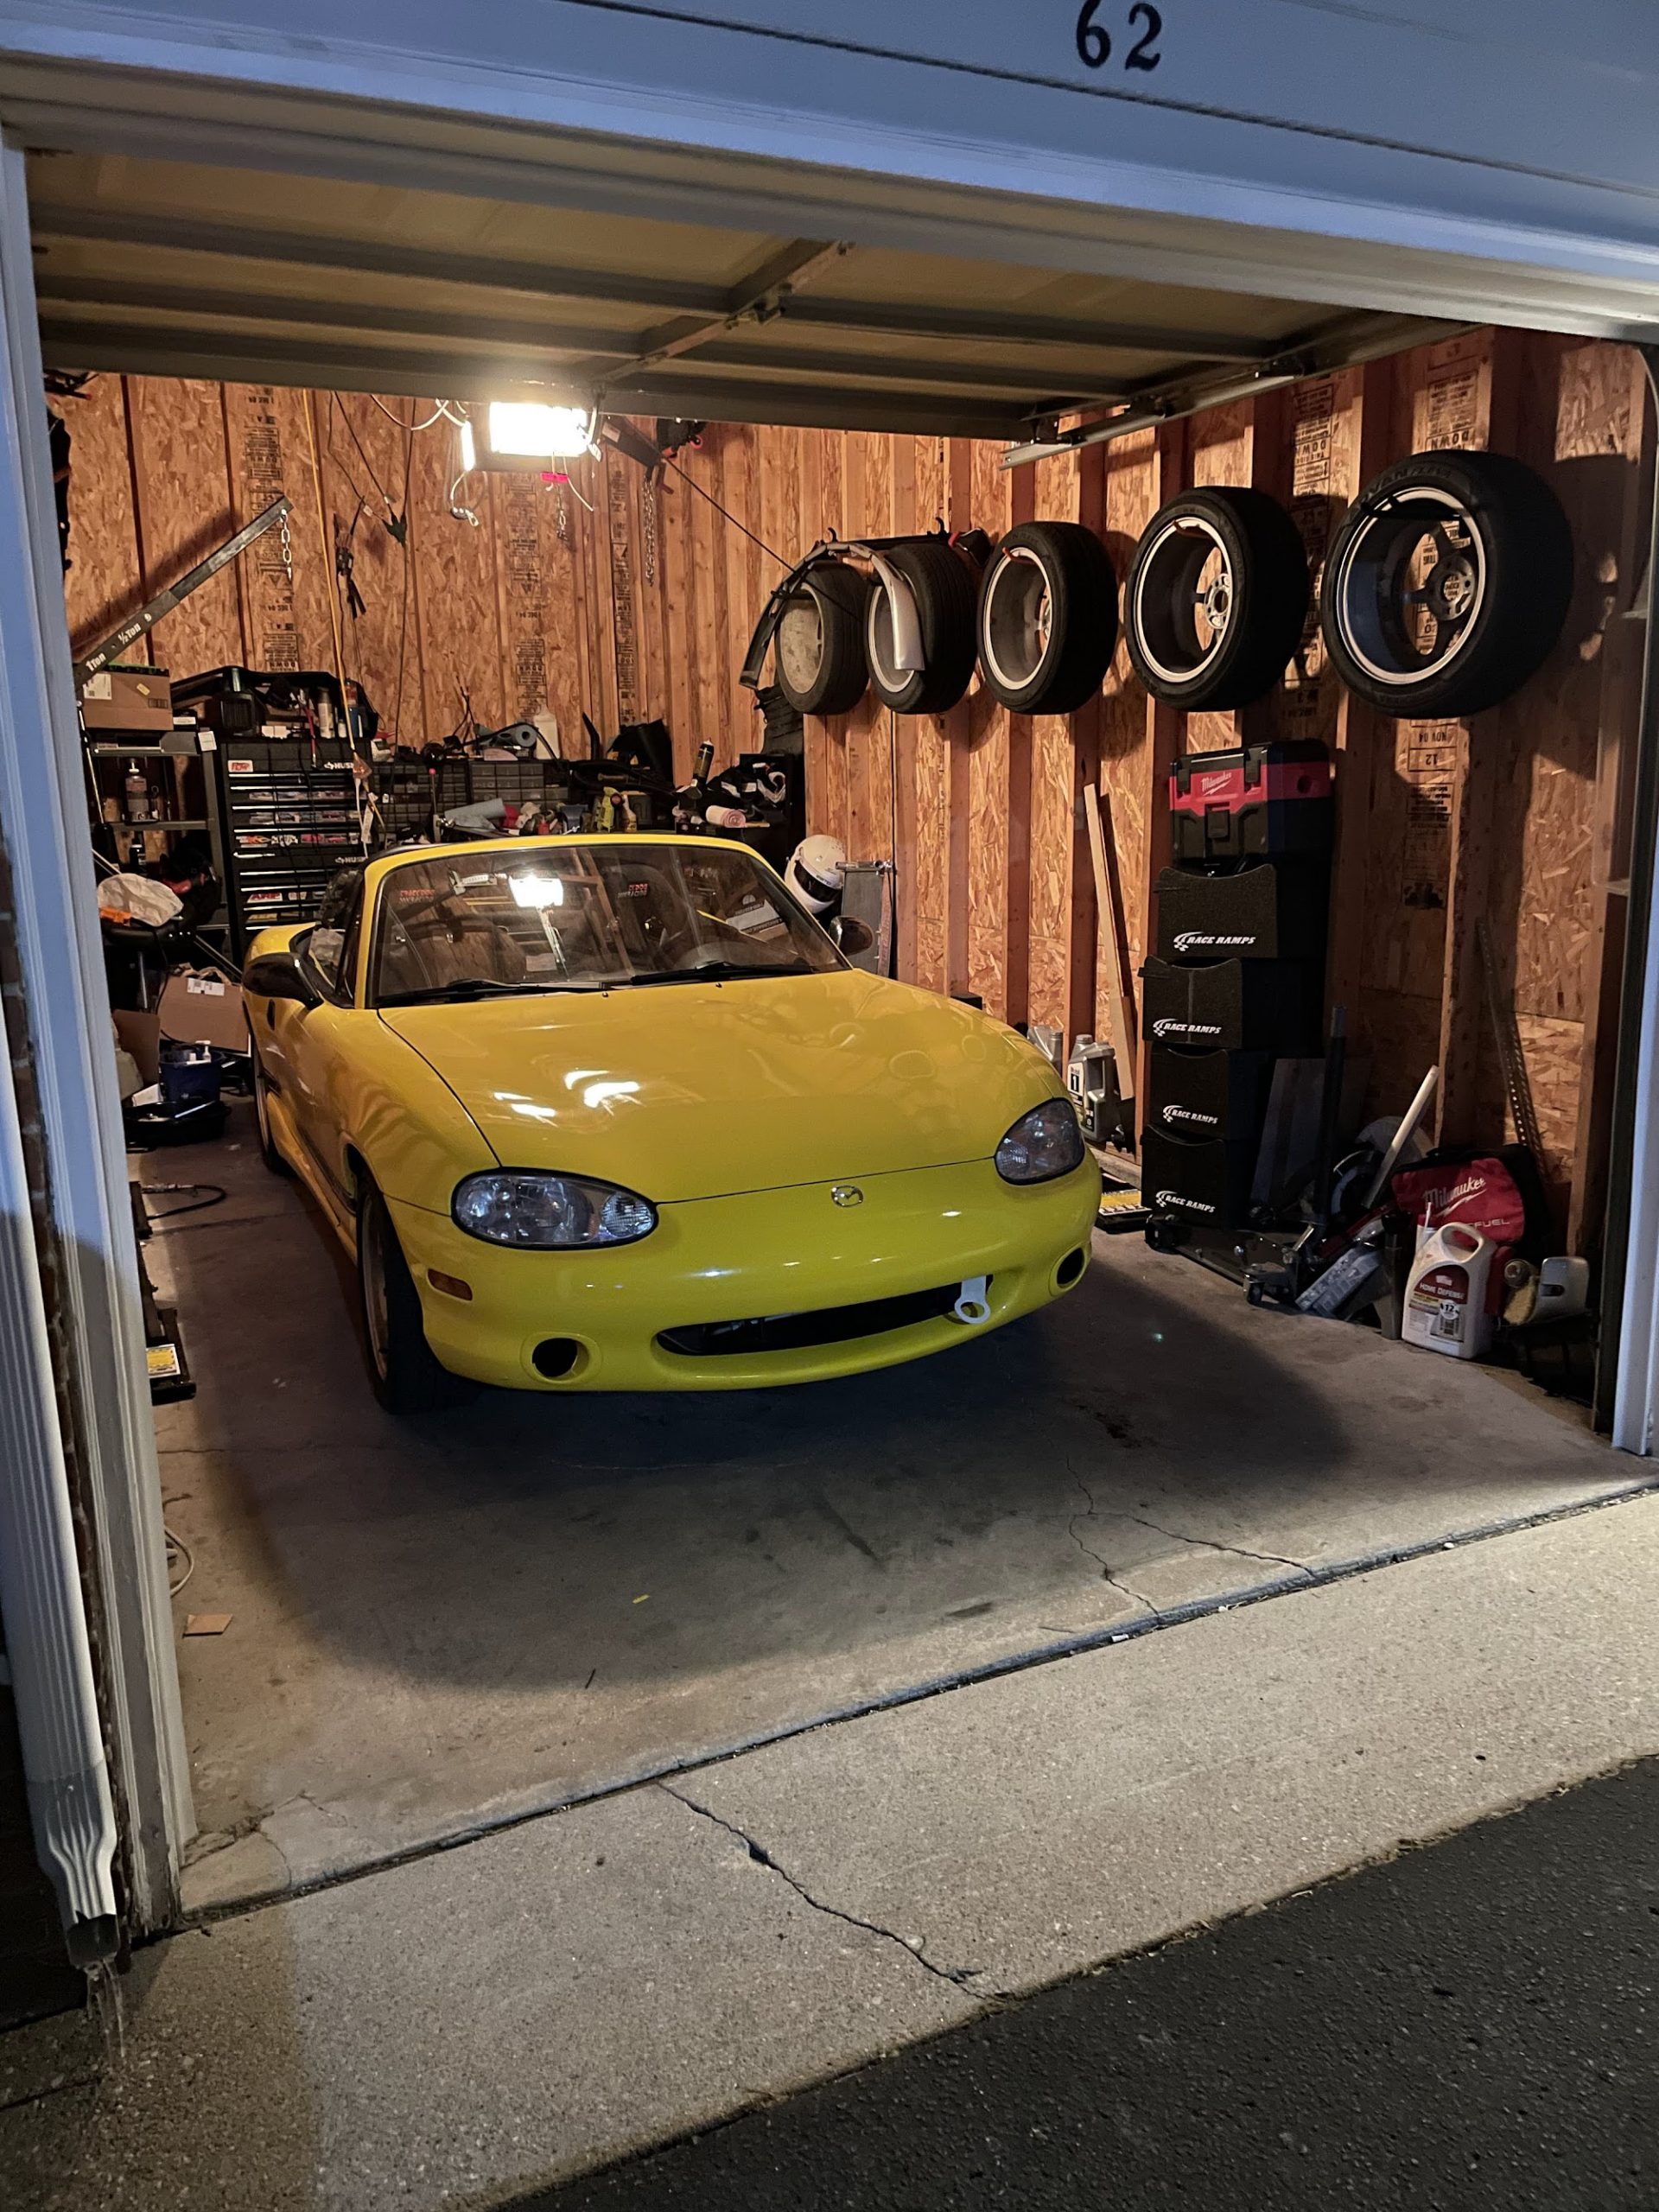 My NB Miata after one year of ownership